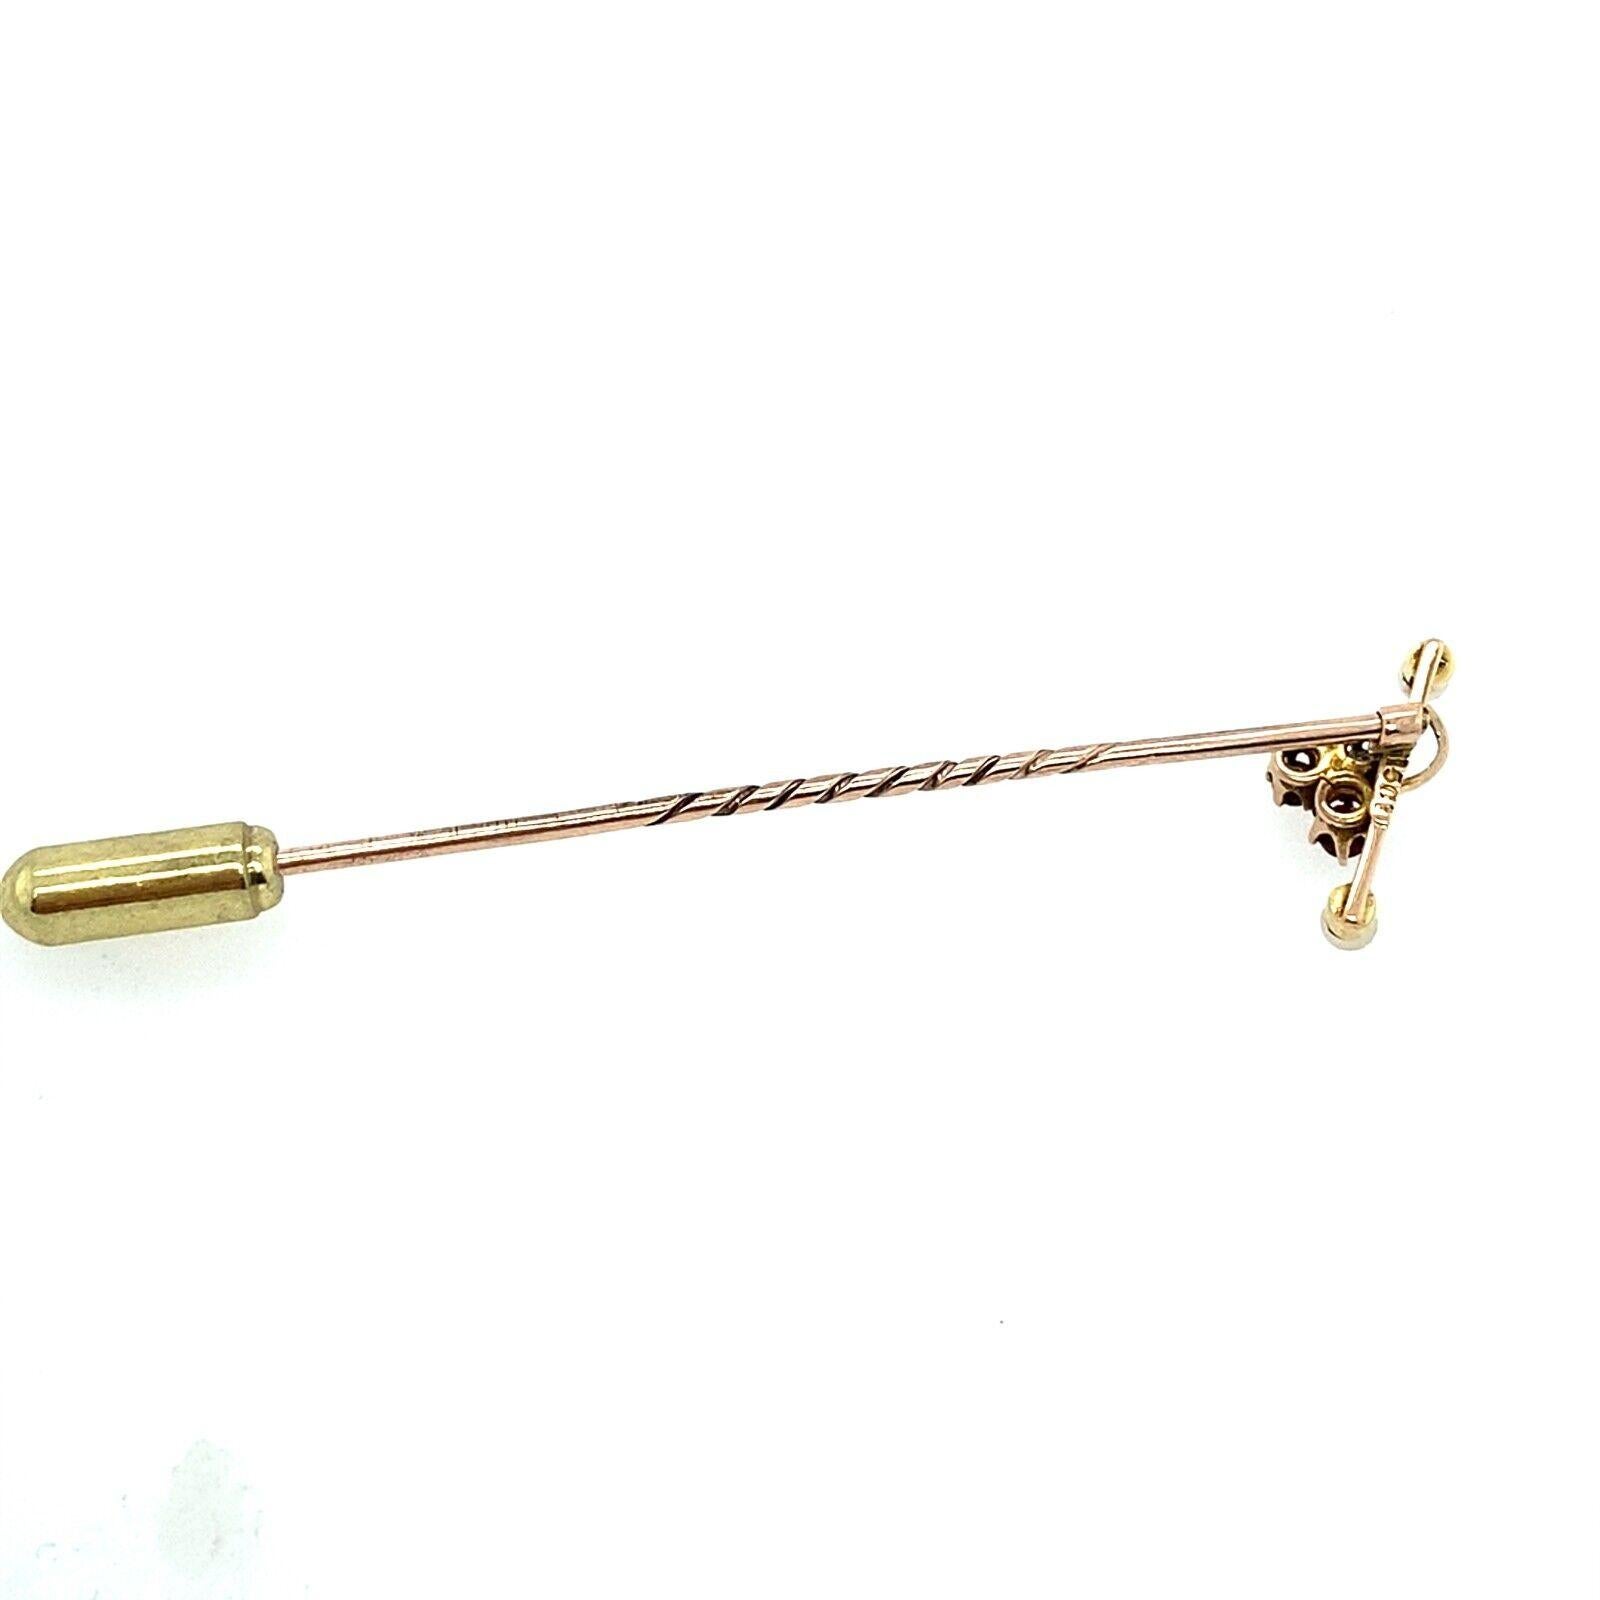 This beautiful stickpin can be worn for any occasion. It is made of 15ct Rose Gold and contains 1 Victorian cut Diamond, Sapphire, Ruby and Cultured Pearls.

Additional Information:
Total Gold Weight: 1.1g
Total Diamond Weight: 0.04ct
Dimension: